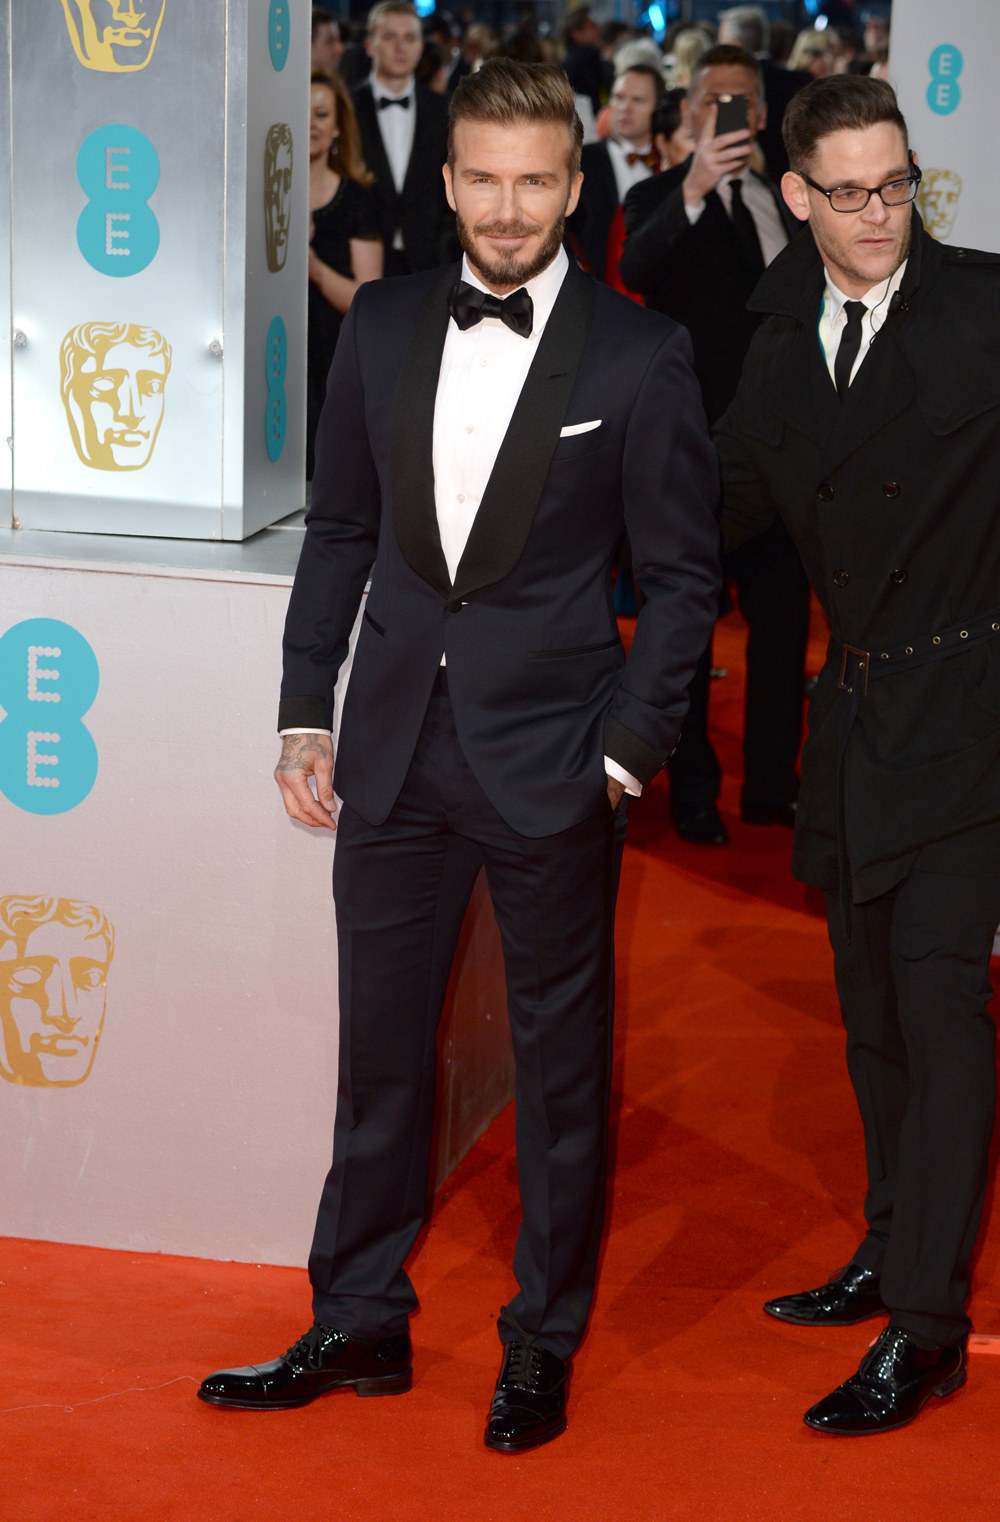 Here Are All The Celebrities Who Attended The BAFTAs